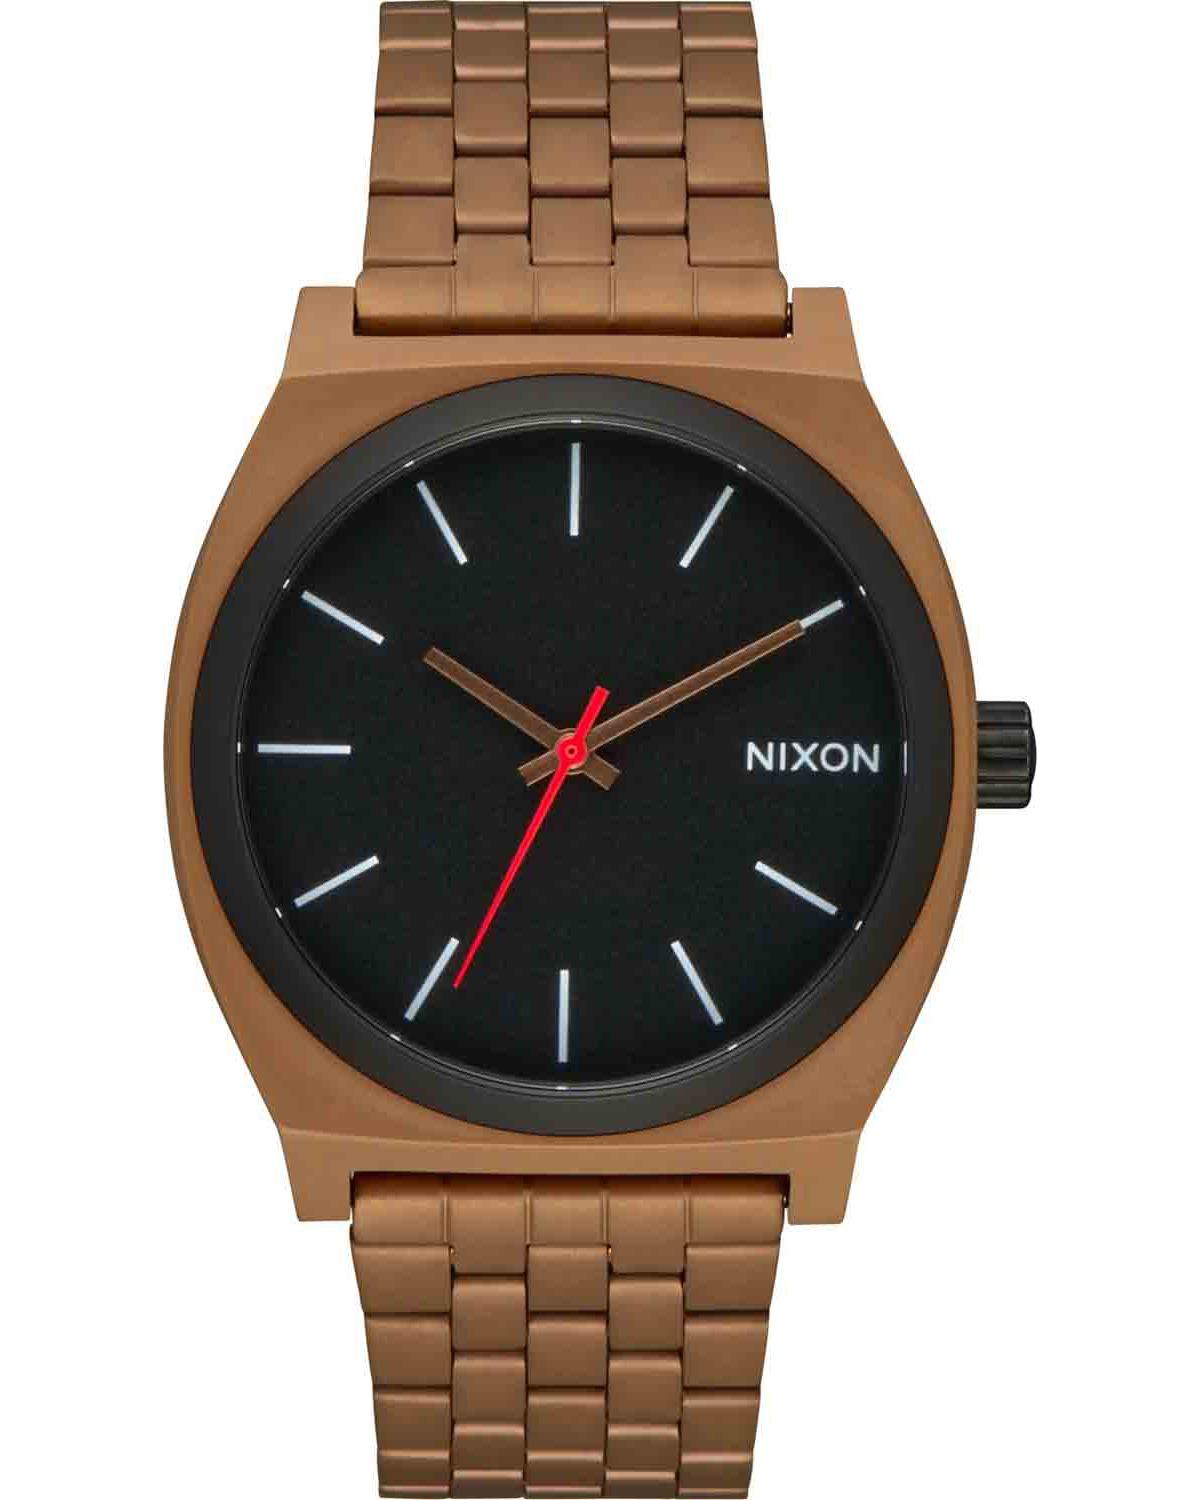 nixon time teller a045 5145 00 brown case with stainless steel bracelet image1